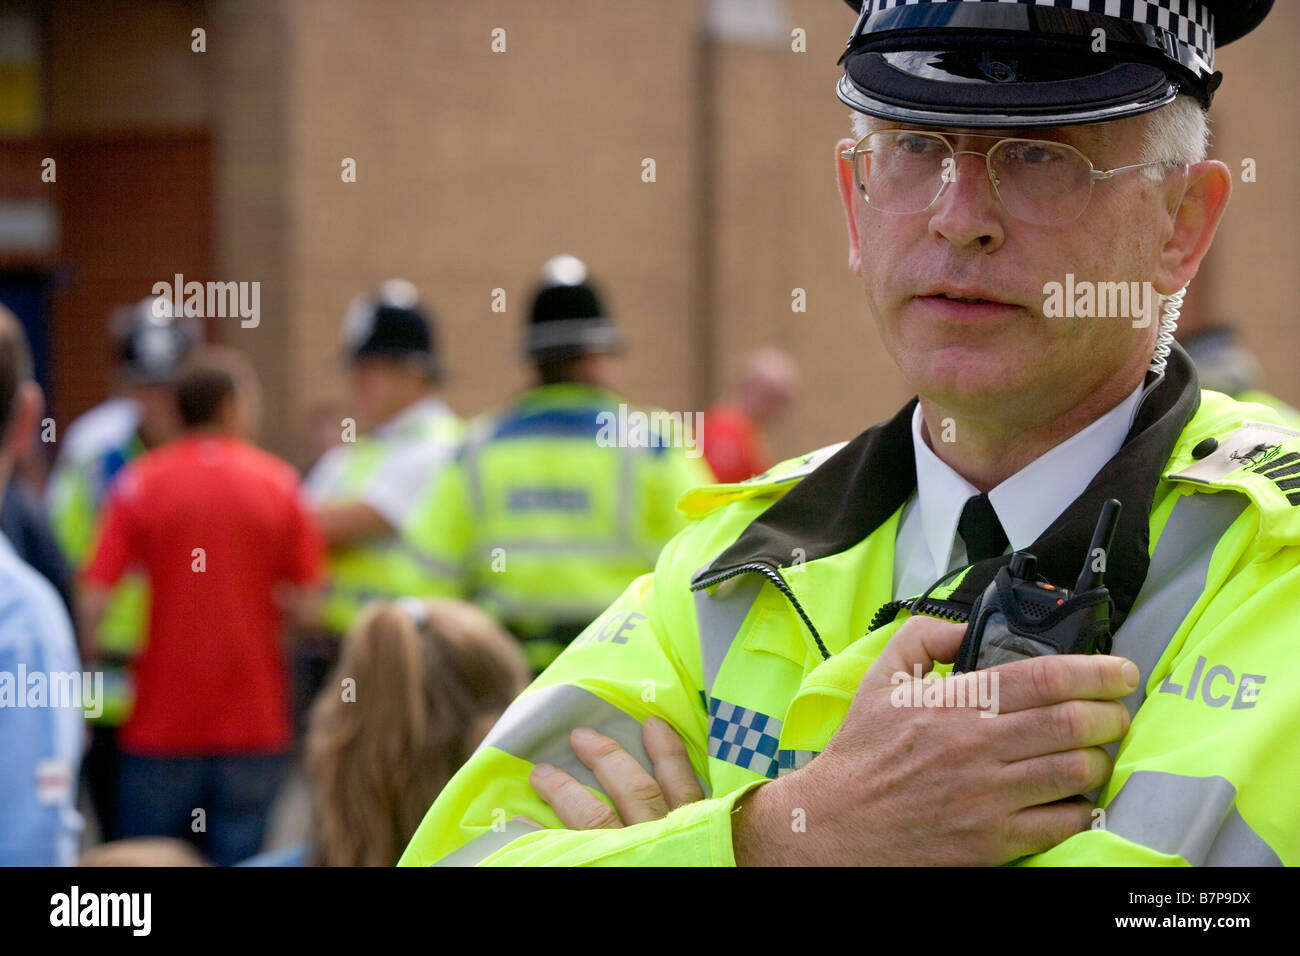 The Commandant of the Hertfordshire Special Constabulary talks on his radio outside Watford Stadium before a match Stock Photo